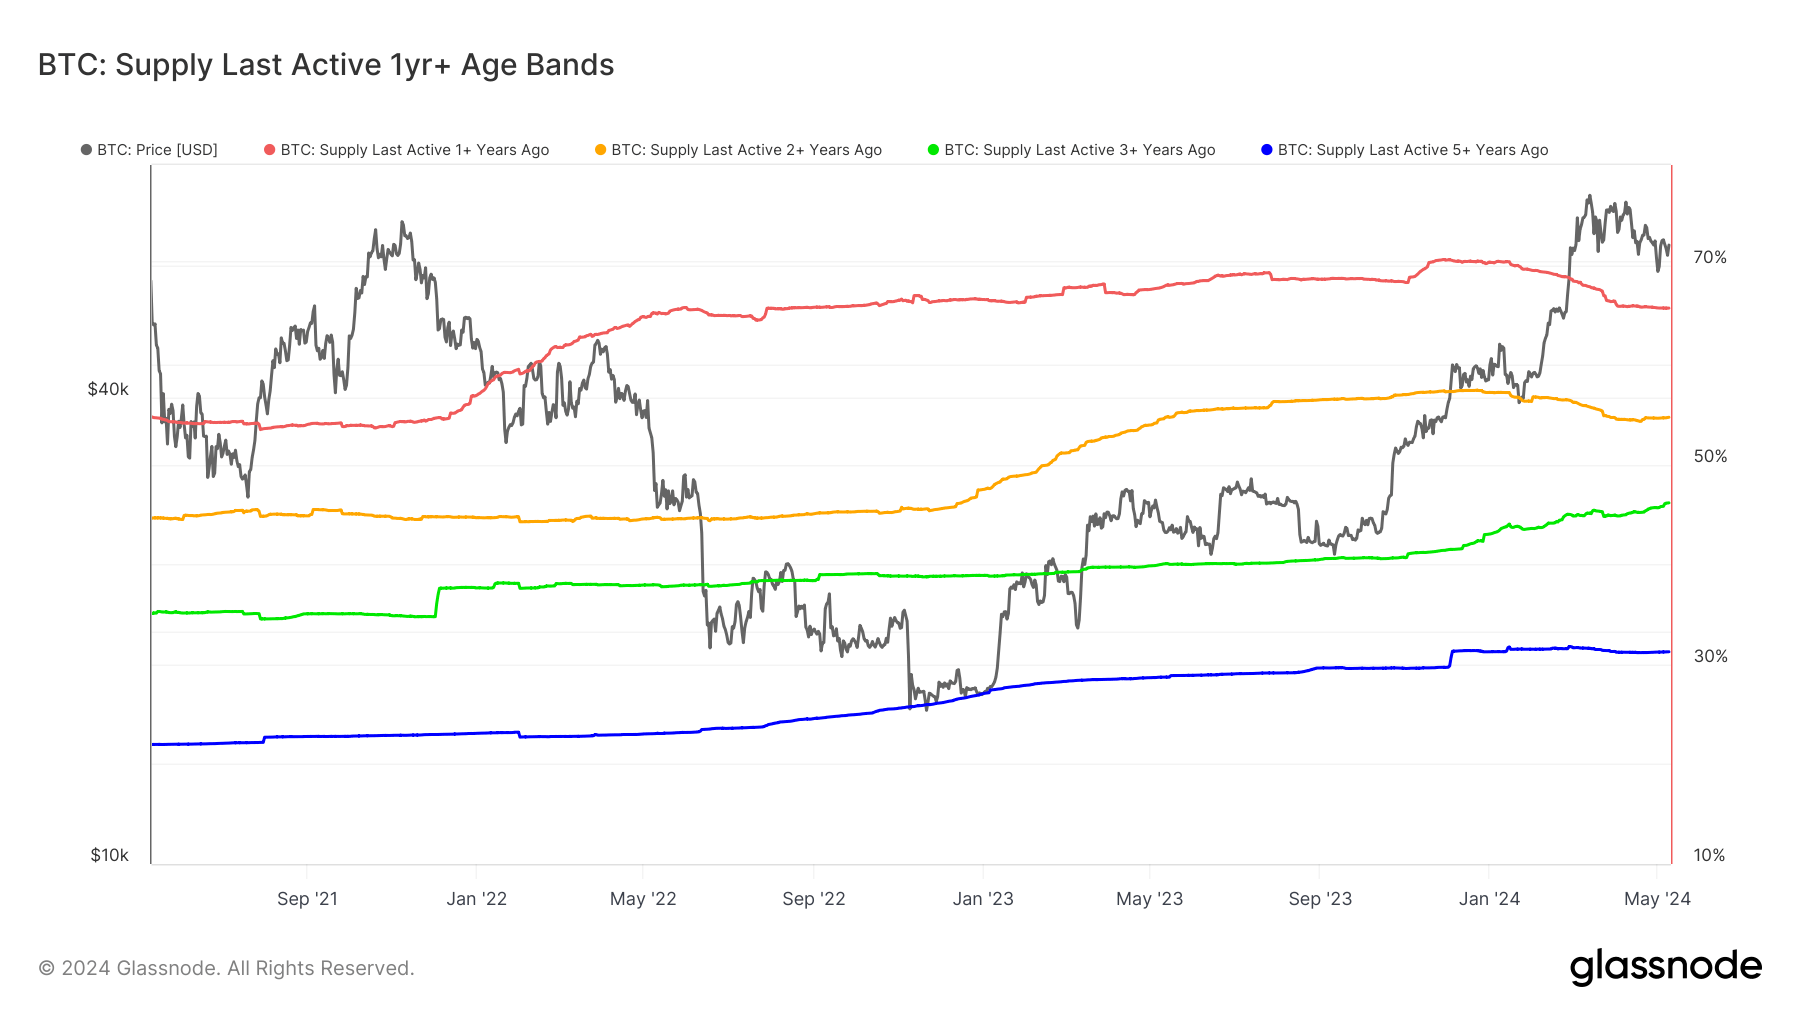 Supply Last Active 1yr+ Age Bands, May 2021- May 2024: (Source: Glassnode)